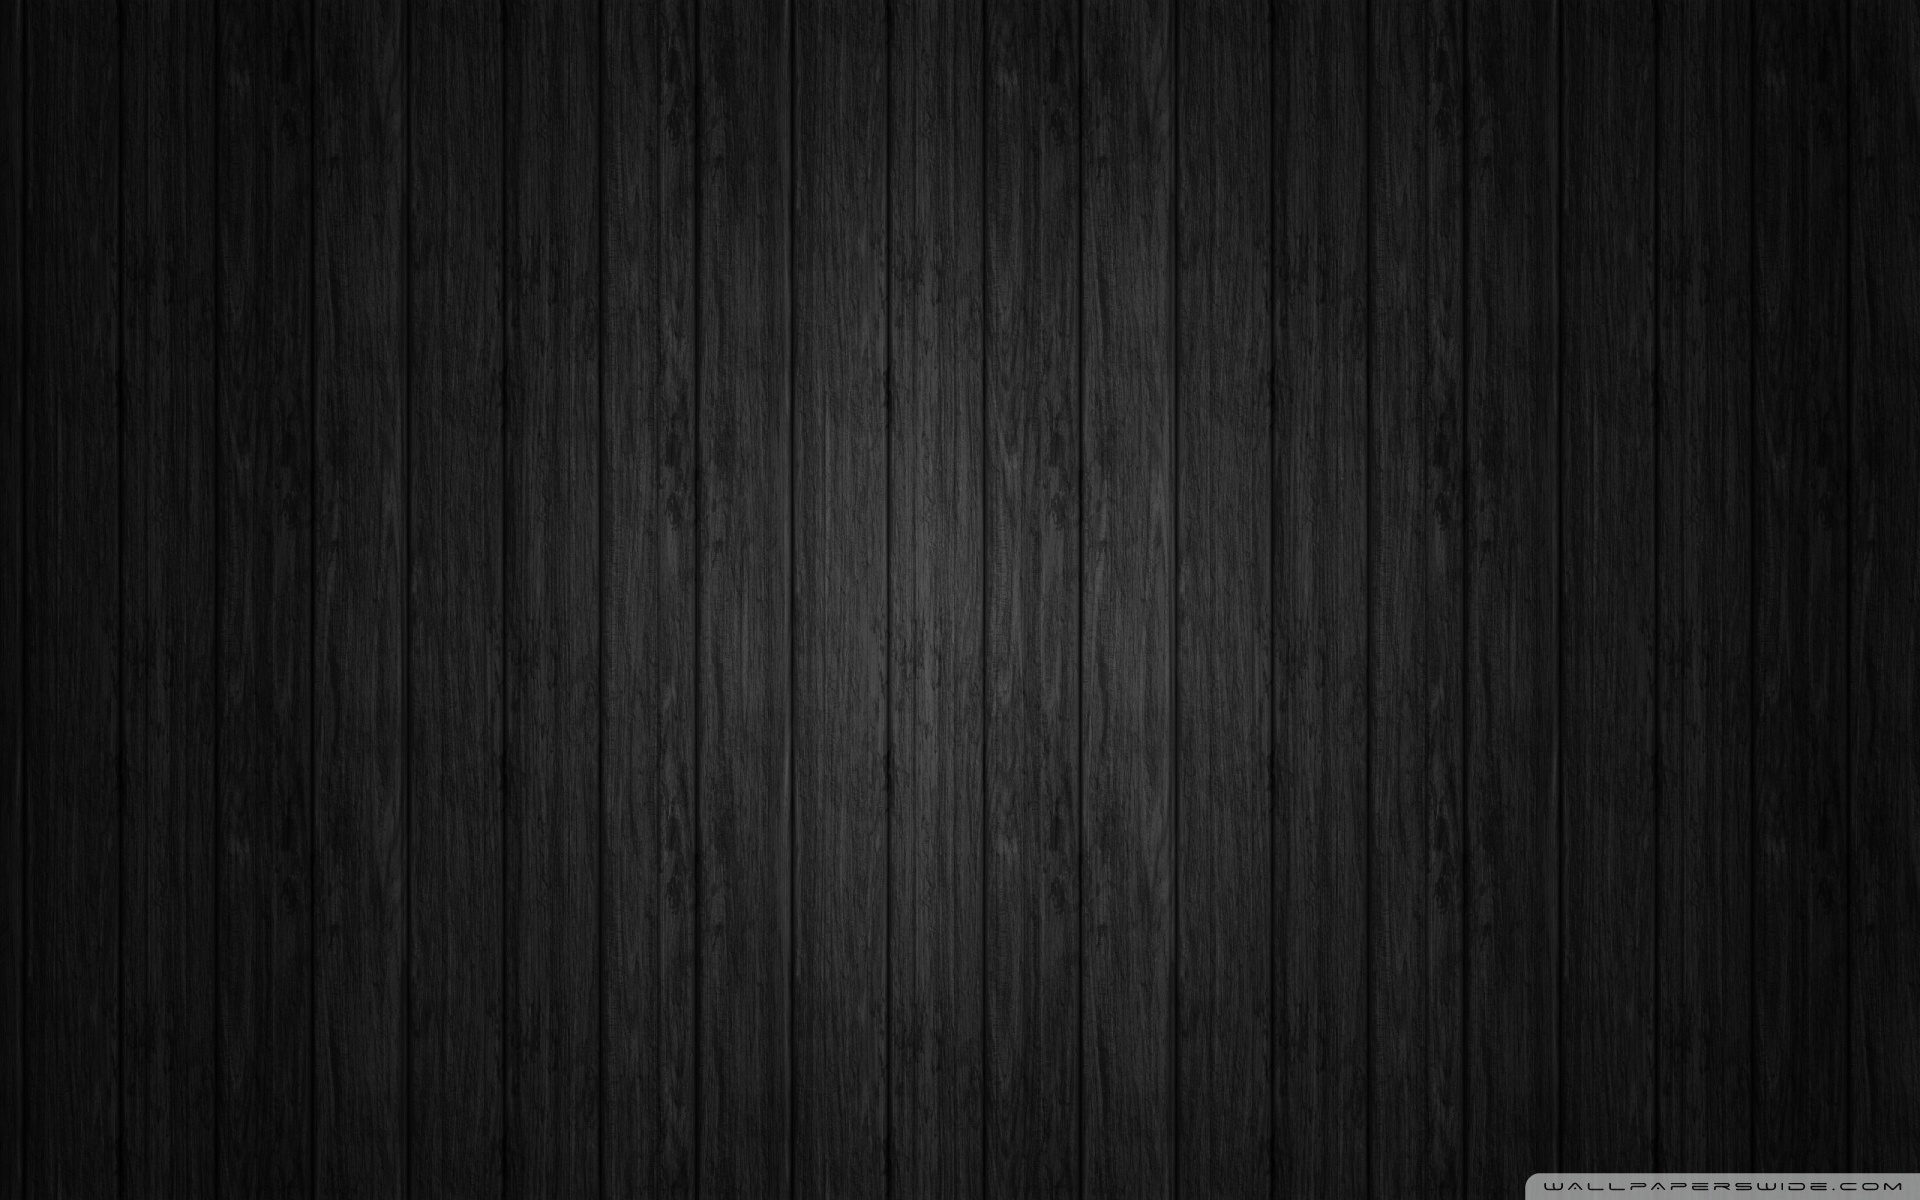 10 Top Dark Wood Wallpaper Hd FULL HD 1080p For PC Background